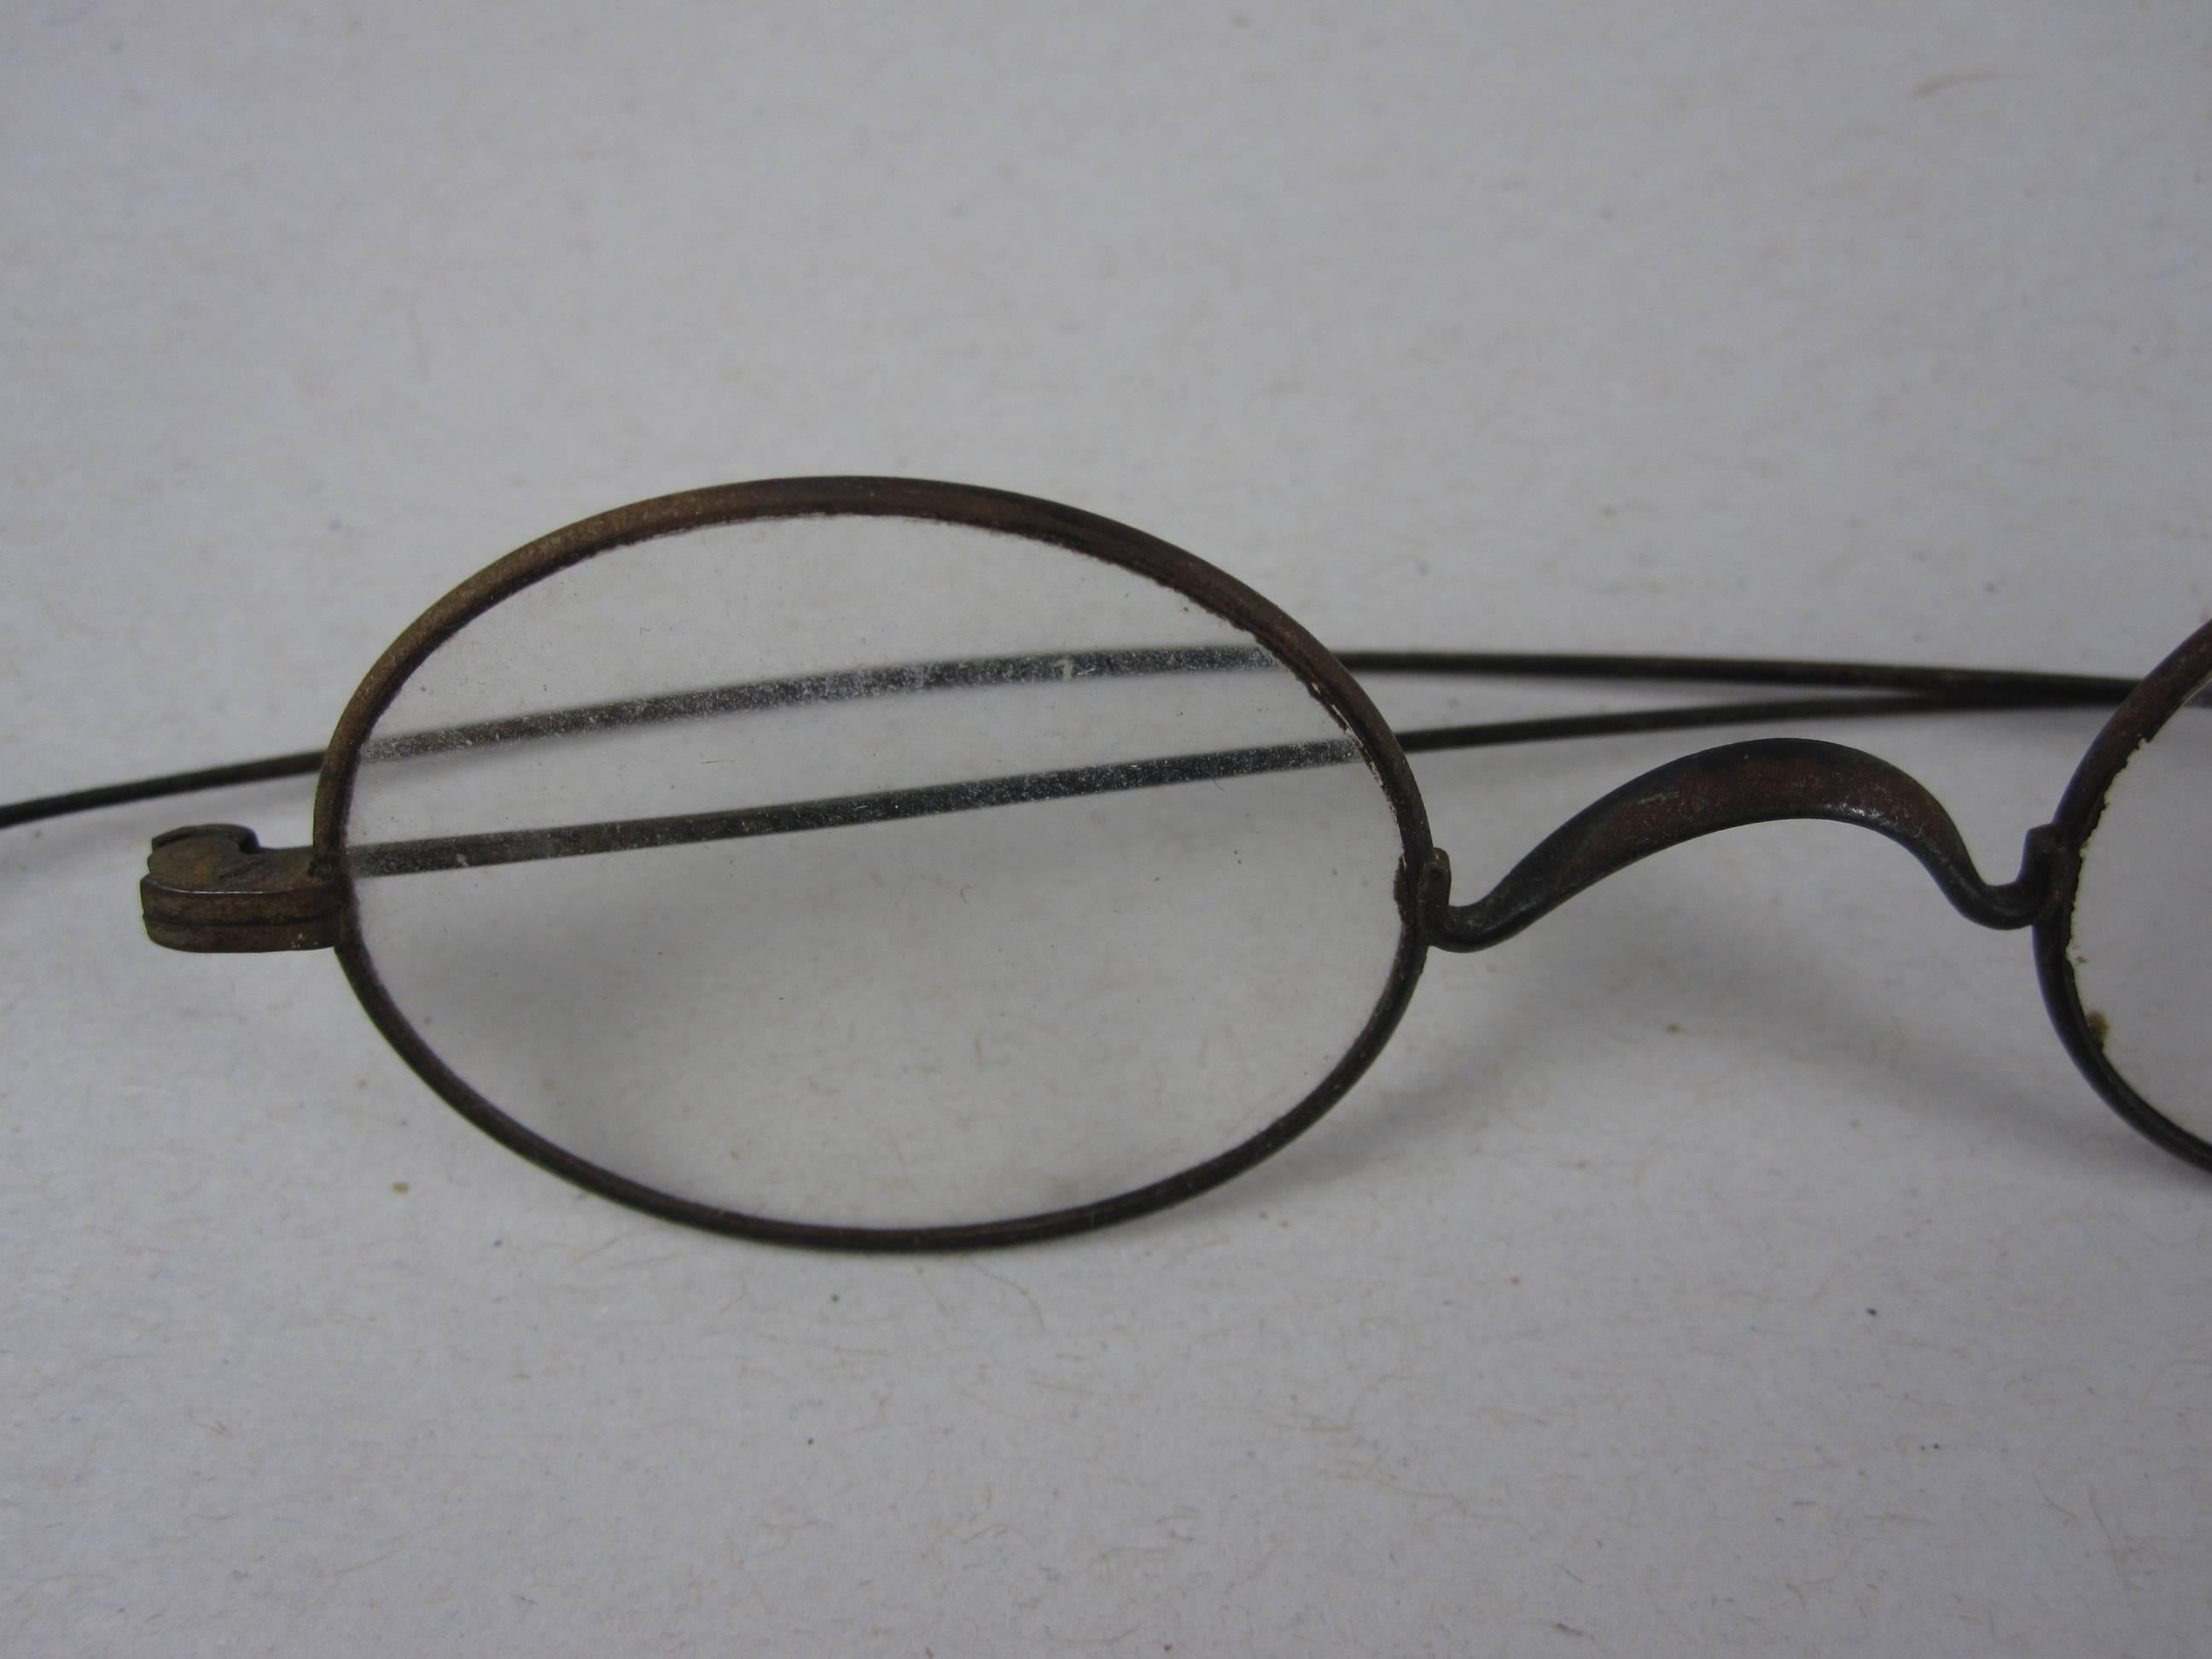 American Classical Historical American Civil War Era Wire Frame Magnifying Eye Glass Spectacles For Sale